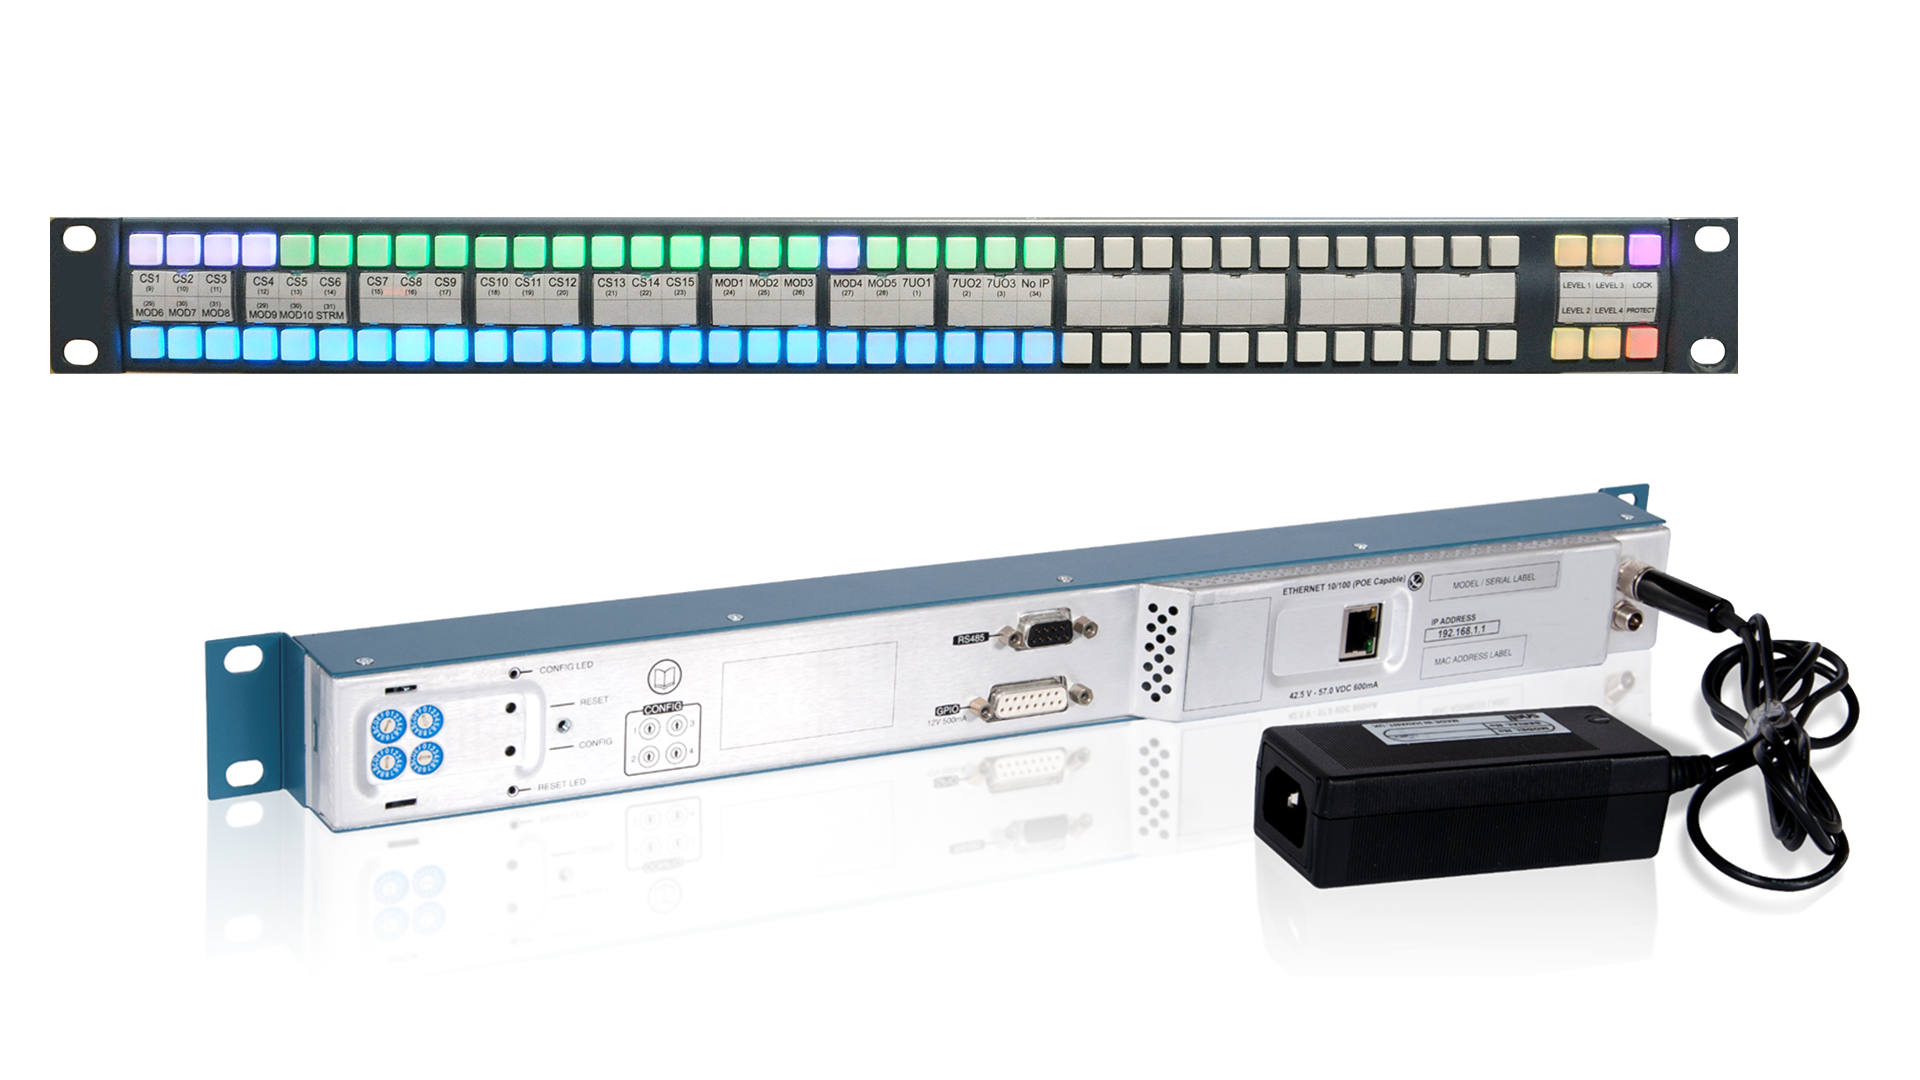 Control Panels For: Sirius 800, Vegs & Pyxis Routers